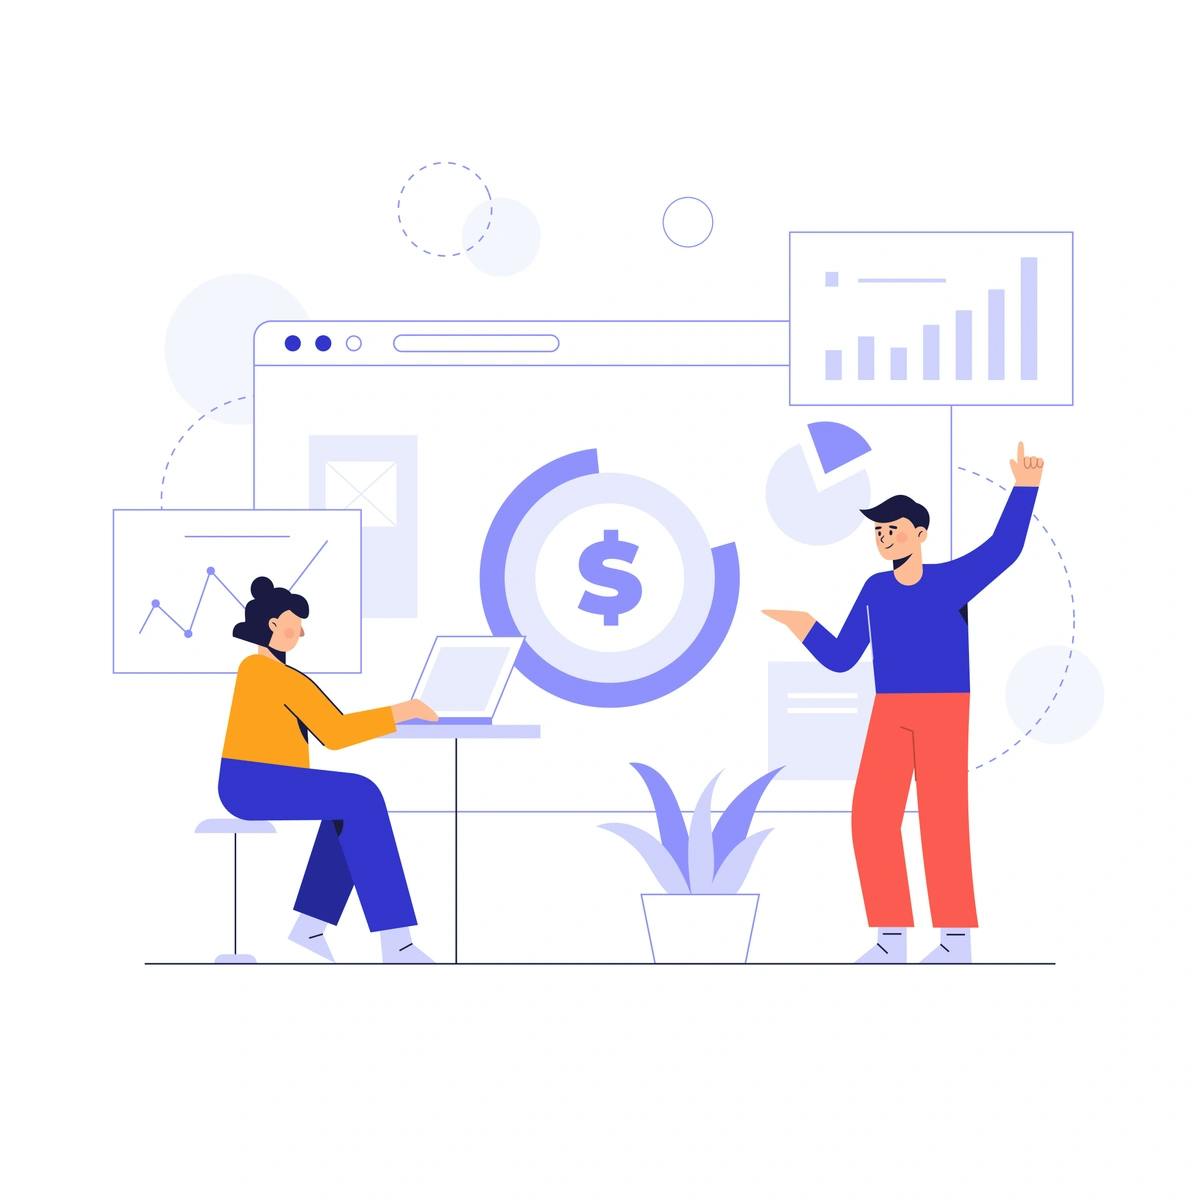 A vibrant illustration showing two individuals in a business setting, where one is working on a laptop and the other is presenting financial data and analytics. This represents teamwork and data-driven decision-making in a corporate environment.